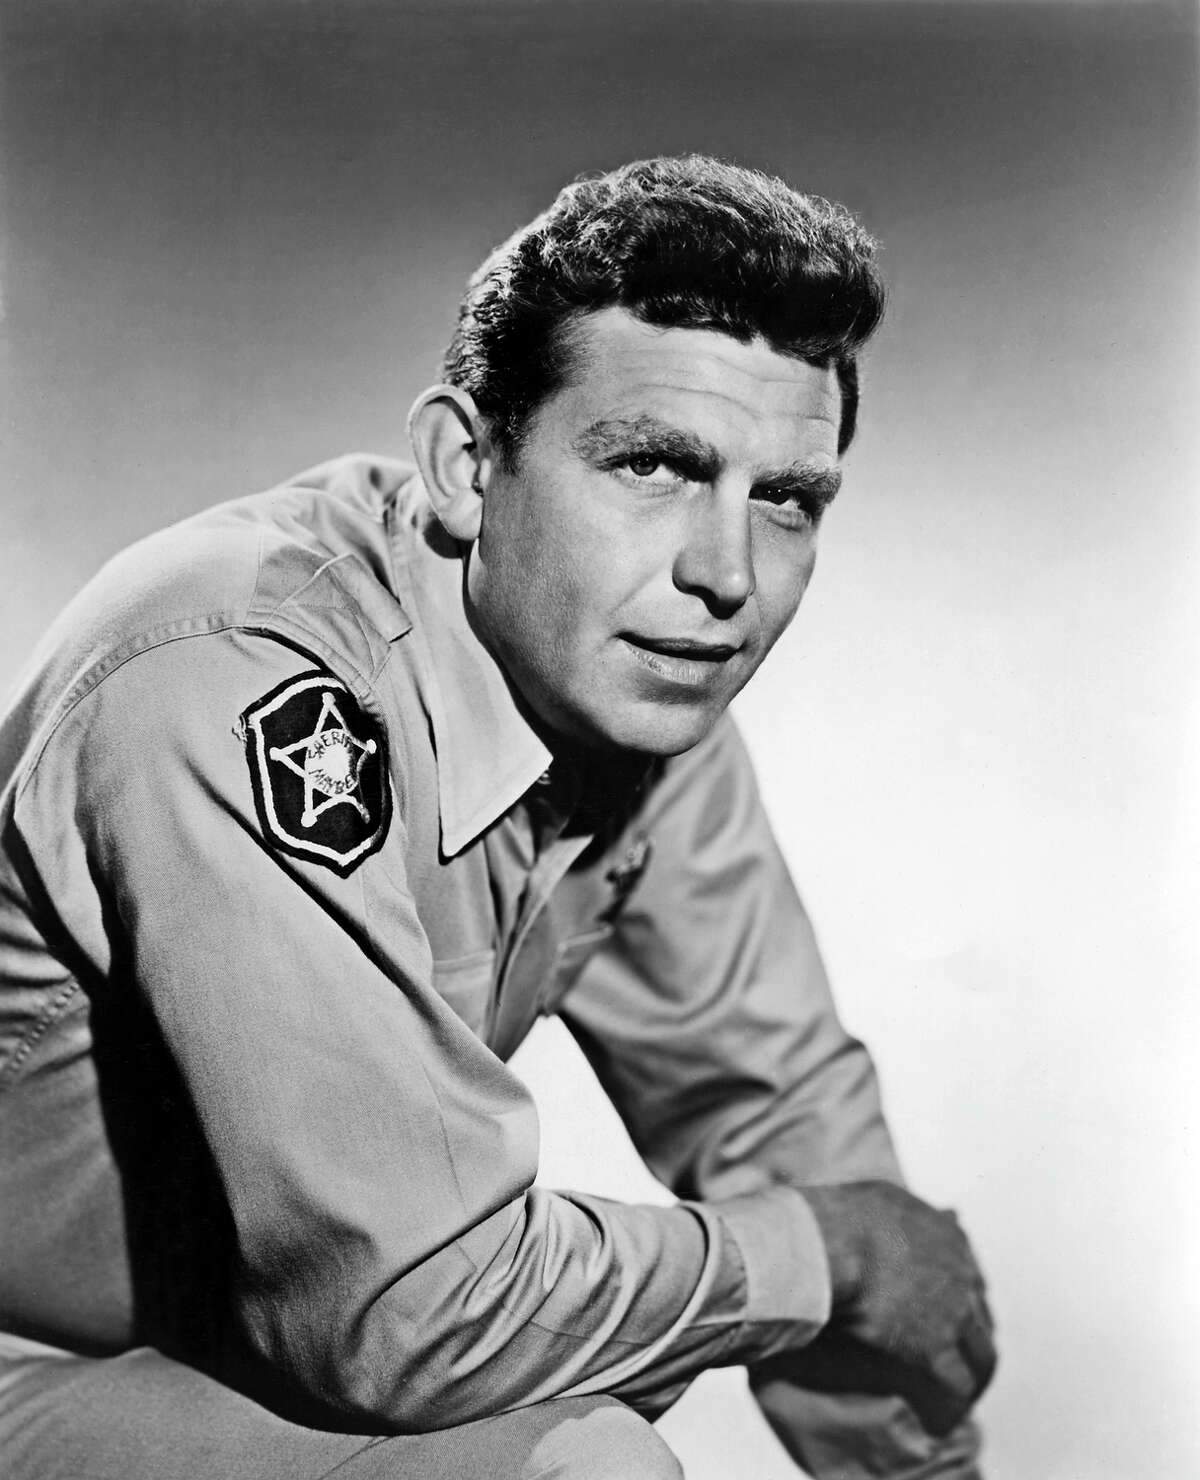 Show: The Andy Griffith ShowDad: Sheriff Andy Taylor (Andy Griffith)Fatherly advice: "When a man carries a gun all the time, the respect he thinks he's getting might really be fear. So I don't carry a gun because I don't want the people of Mayberry to fear a gun. I'd rather they respect me."